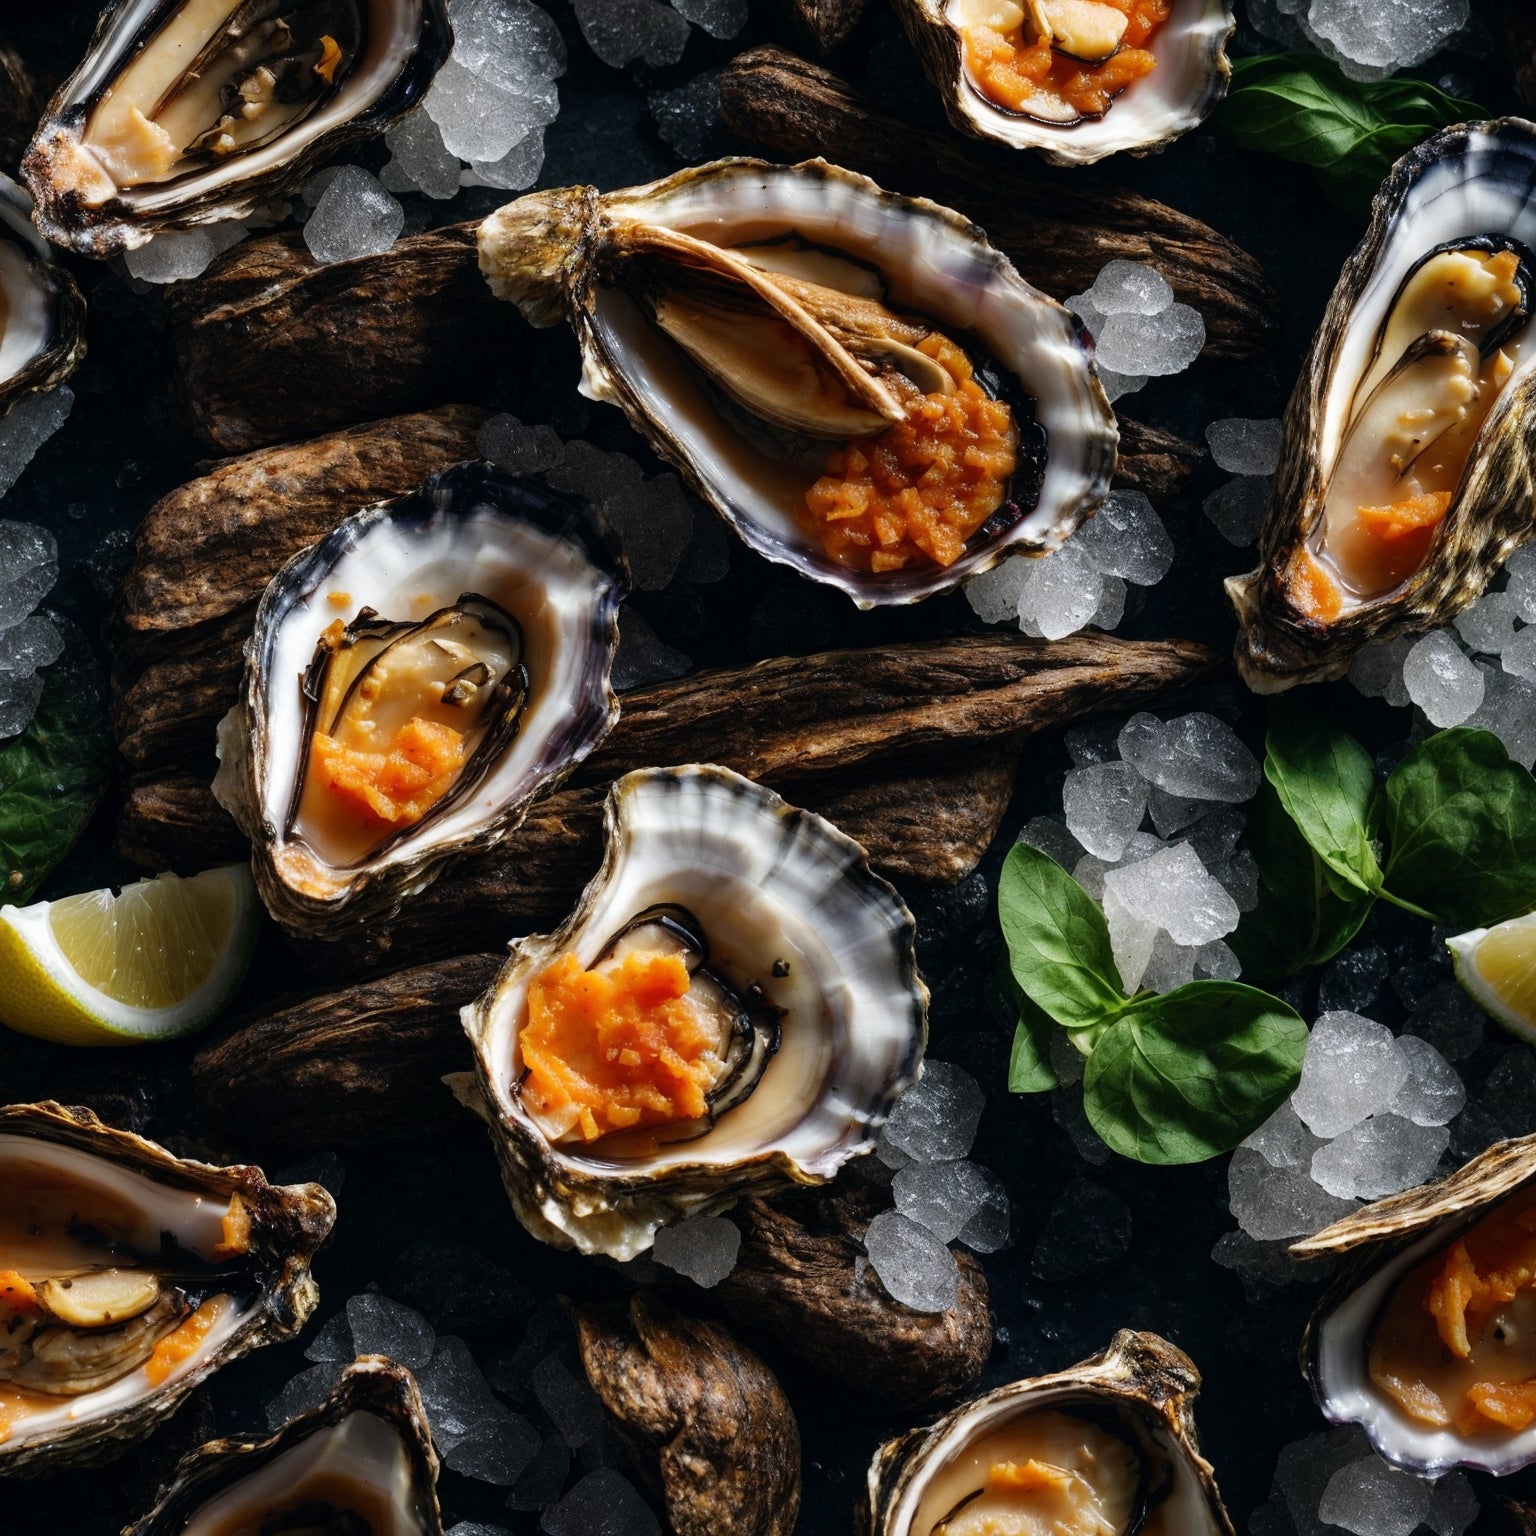 Nutritional Treasures: The Health Benefits of Oysters